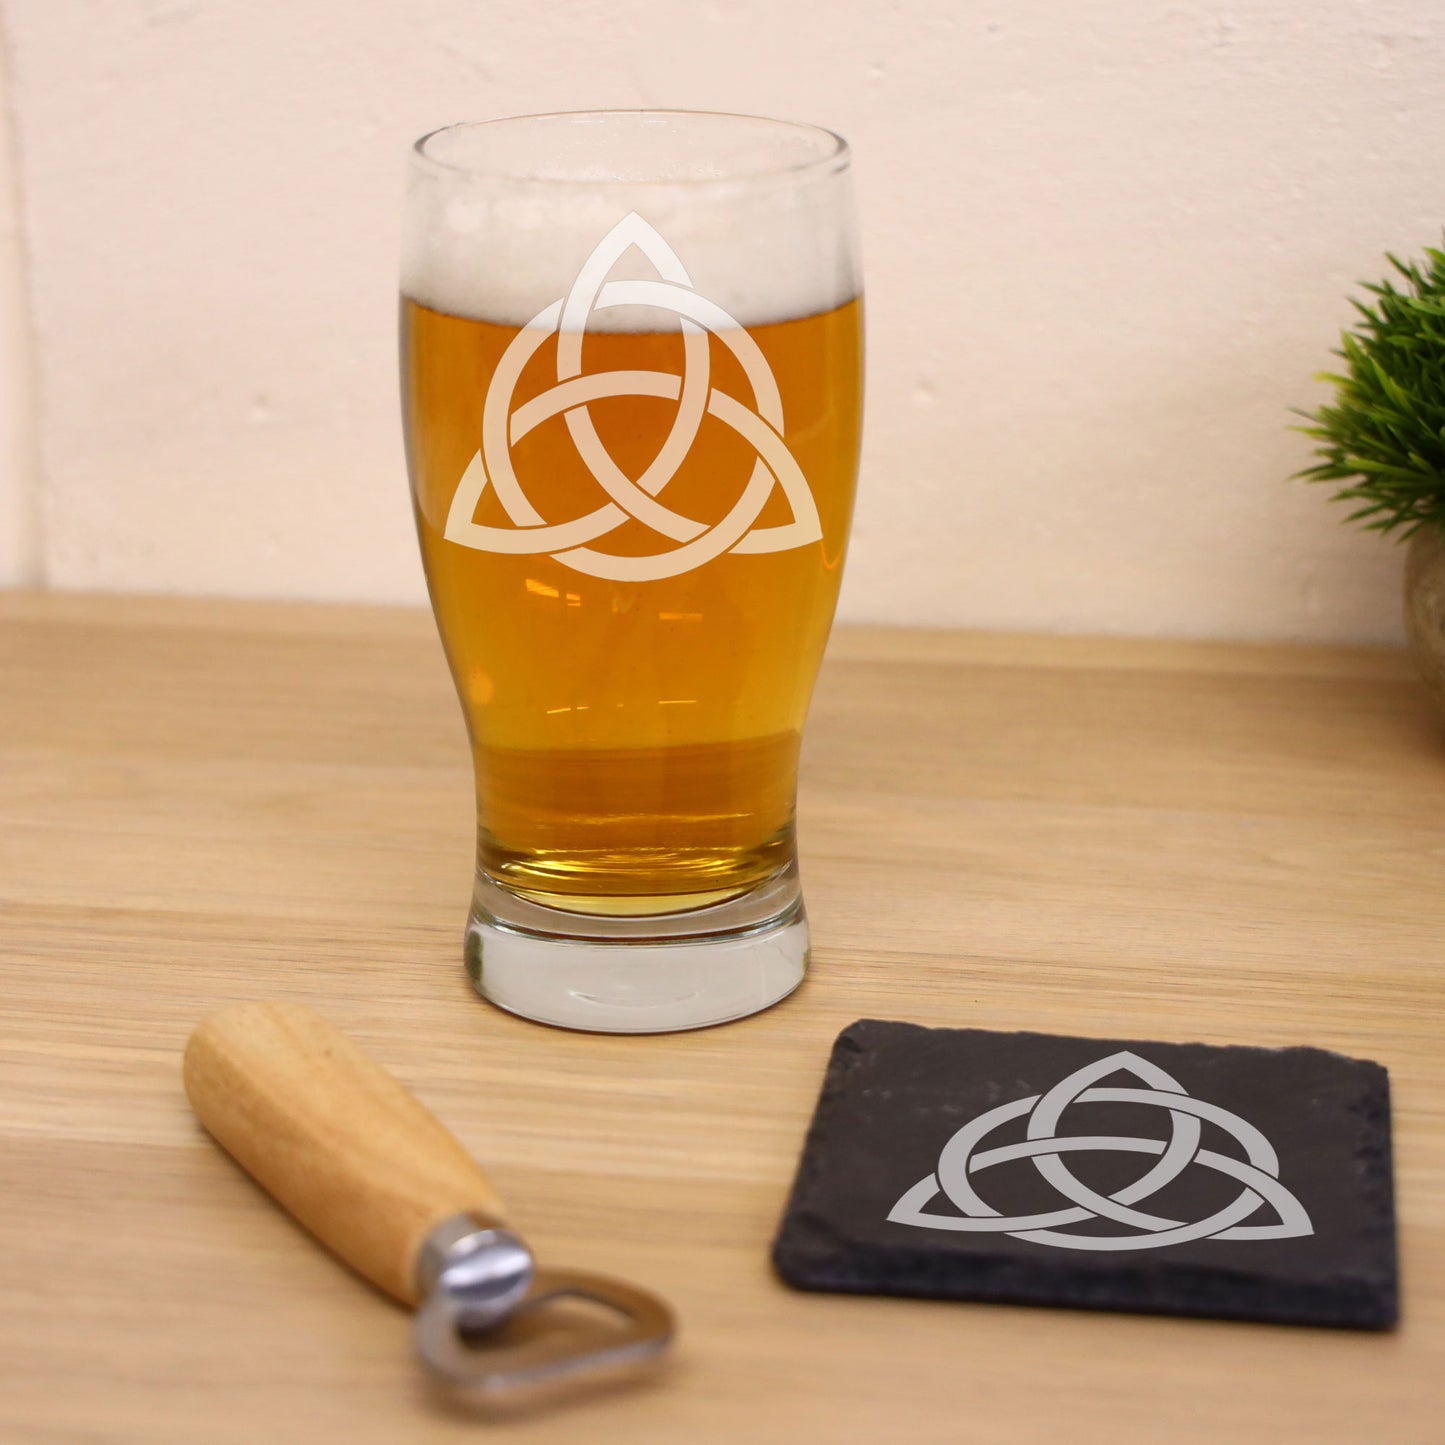 Celtic Knot Engraved Beer Pint Glass and/or Coaster Set  - Always Looking Good - Glass & Square Coaster Set  